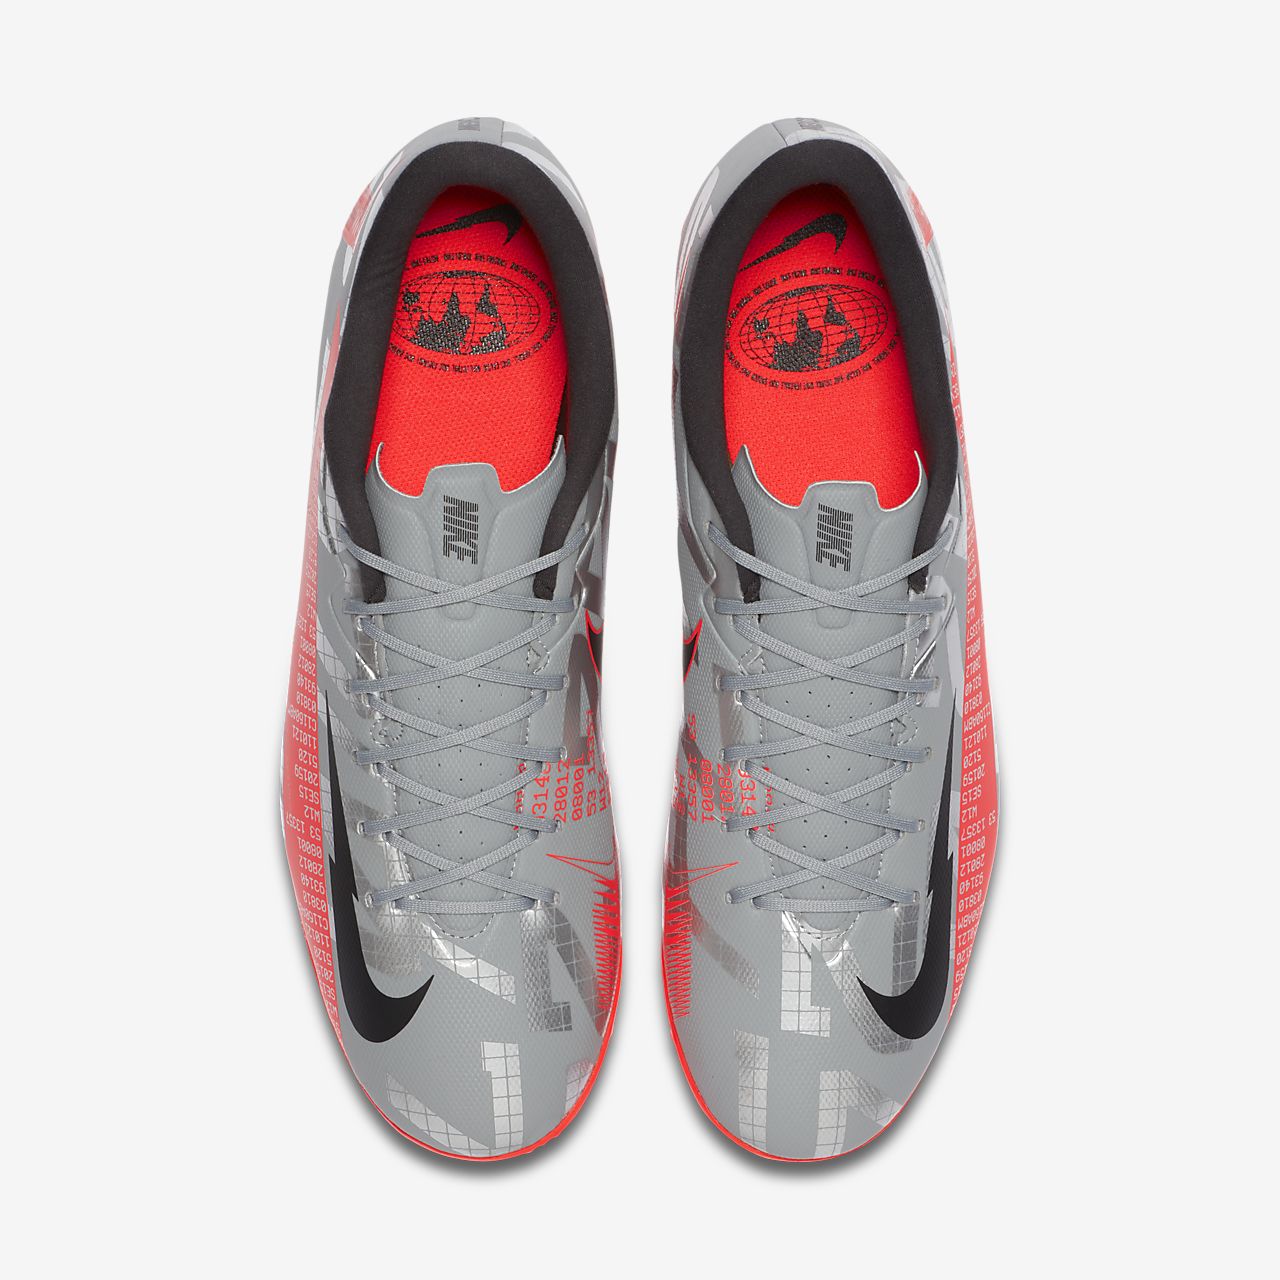 Nike Tiempo Legend 8 Pro Tf M AT6136606 football shoes red.